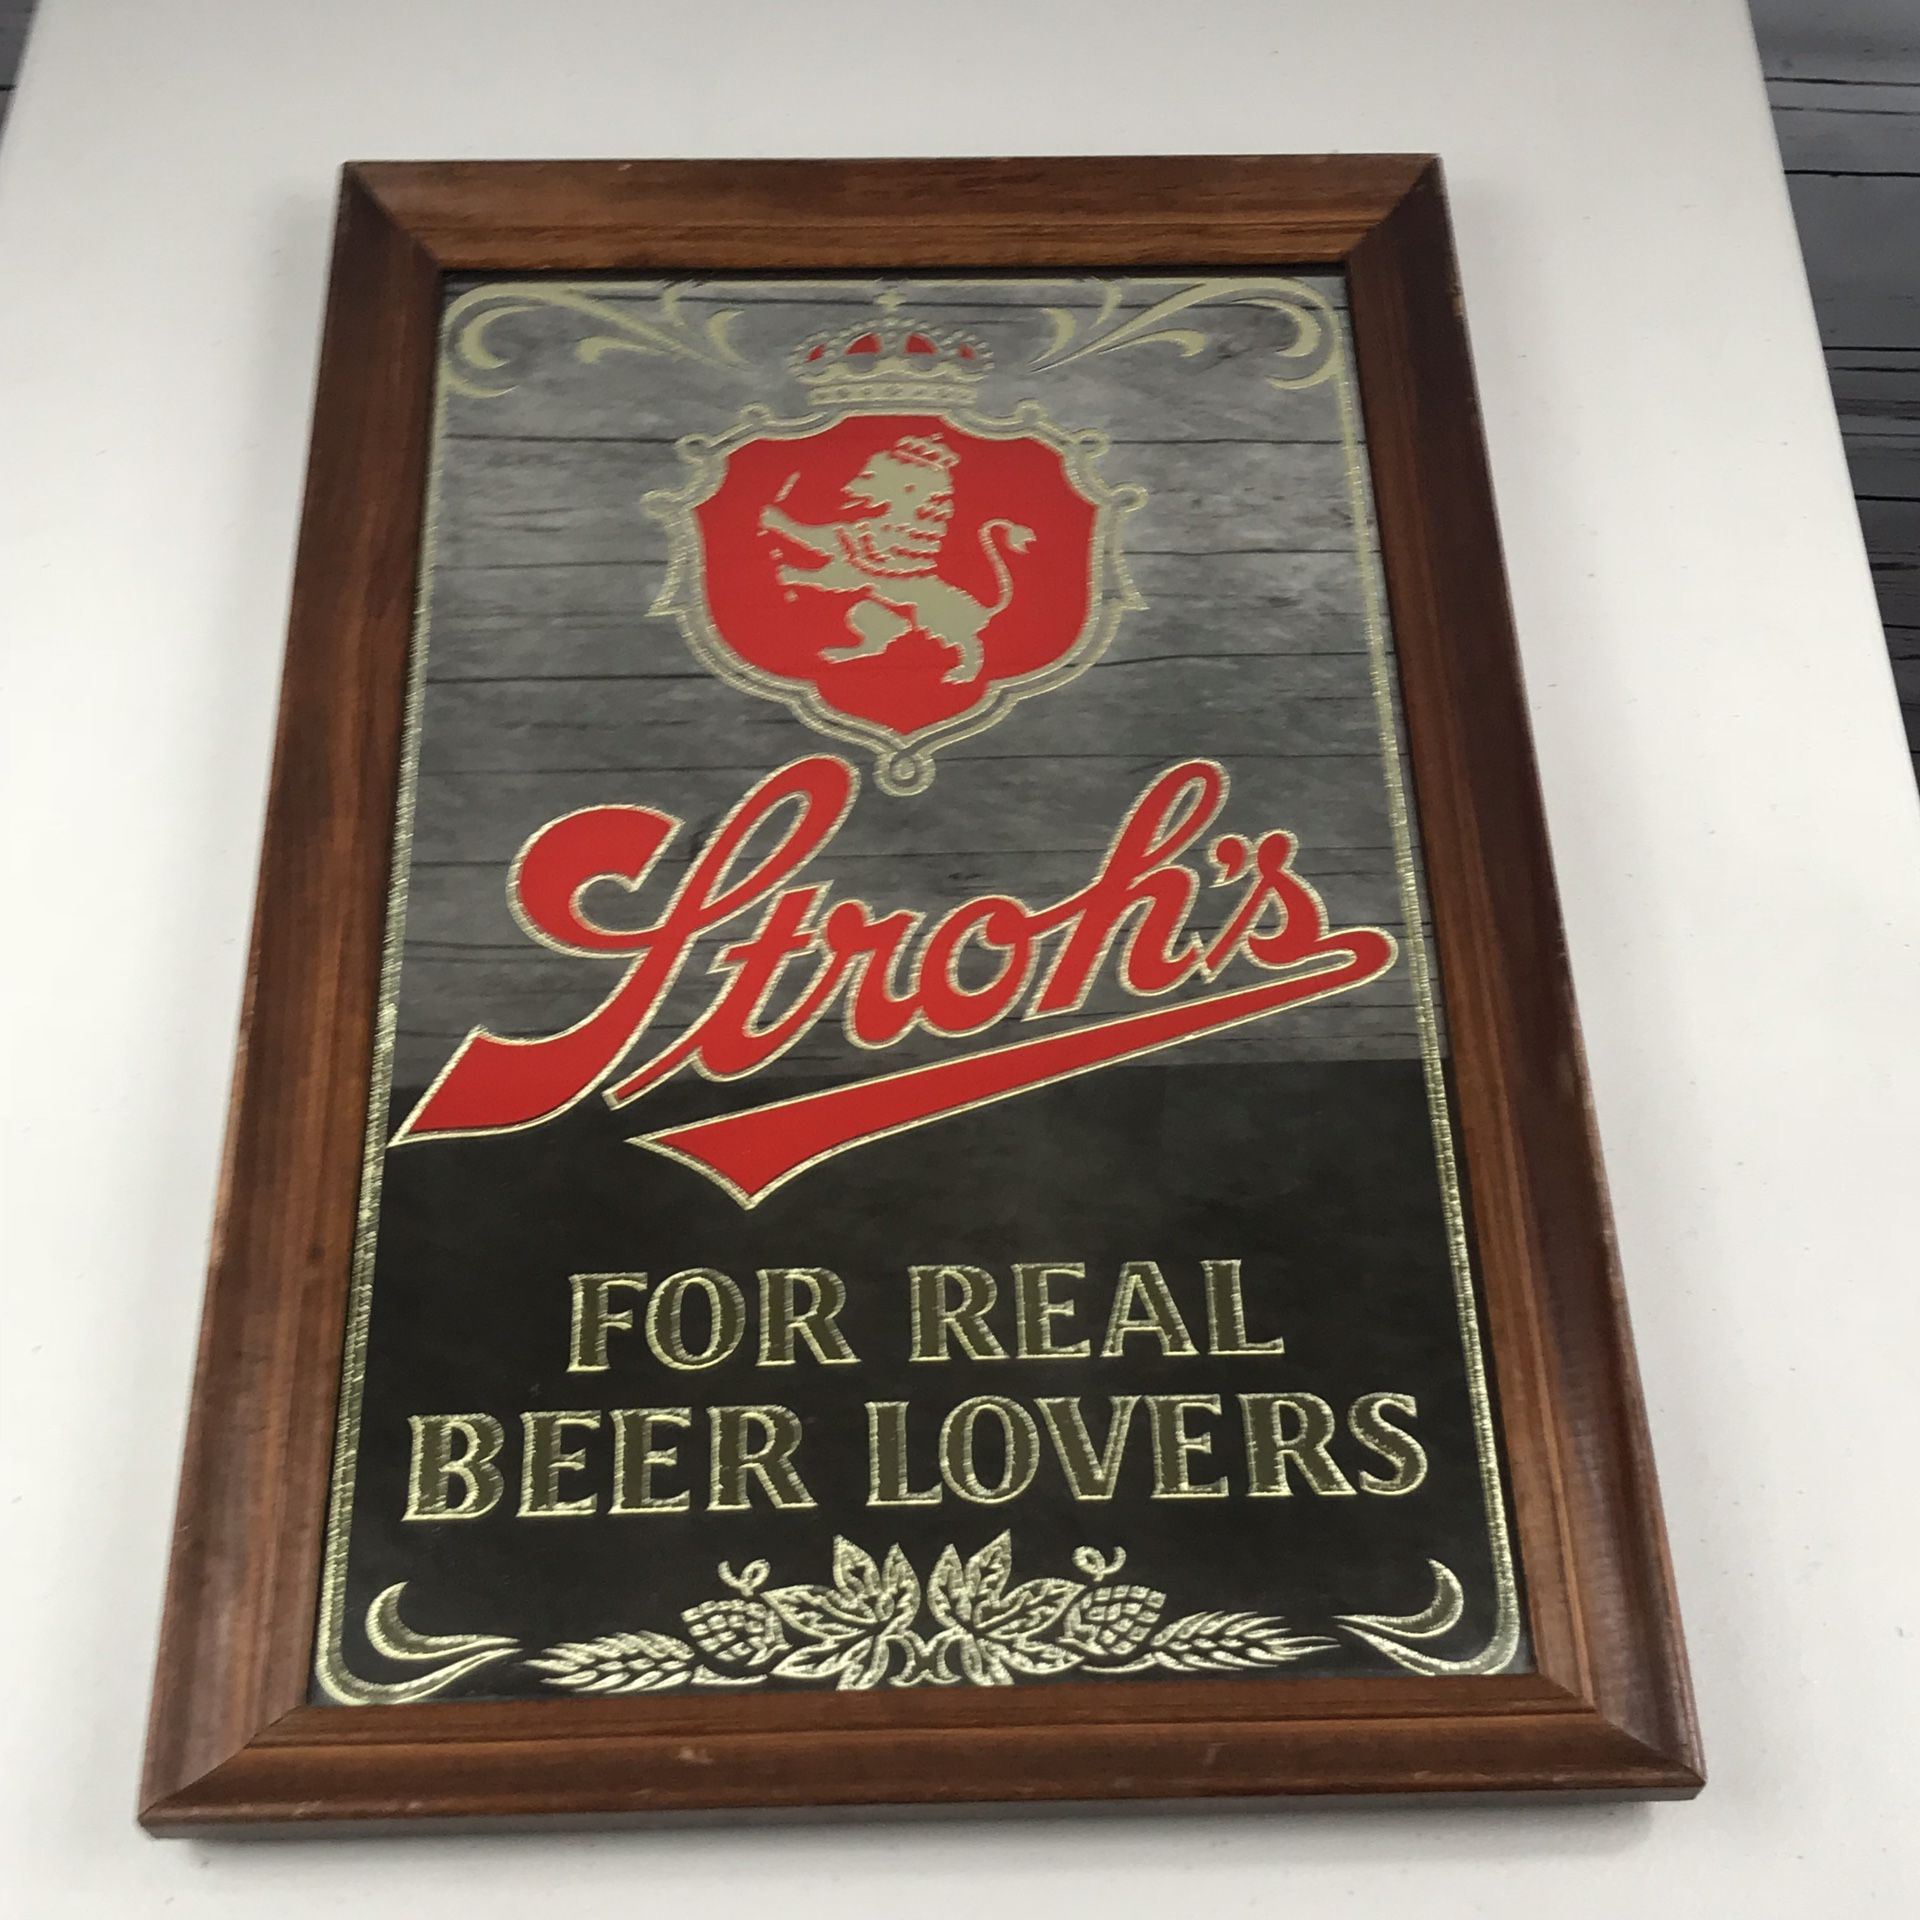 Strohs for real beer lovers mirror sign rare 21x14”